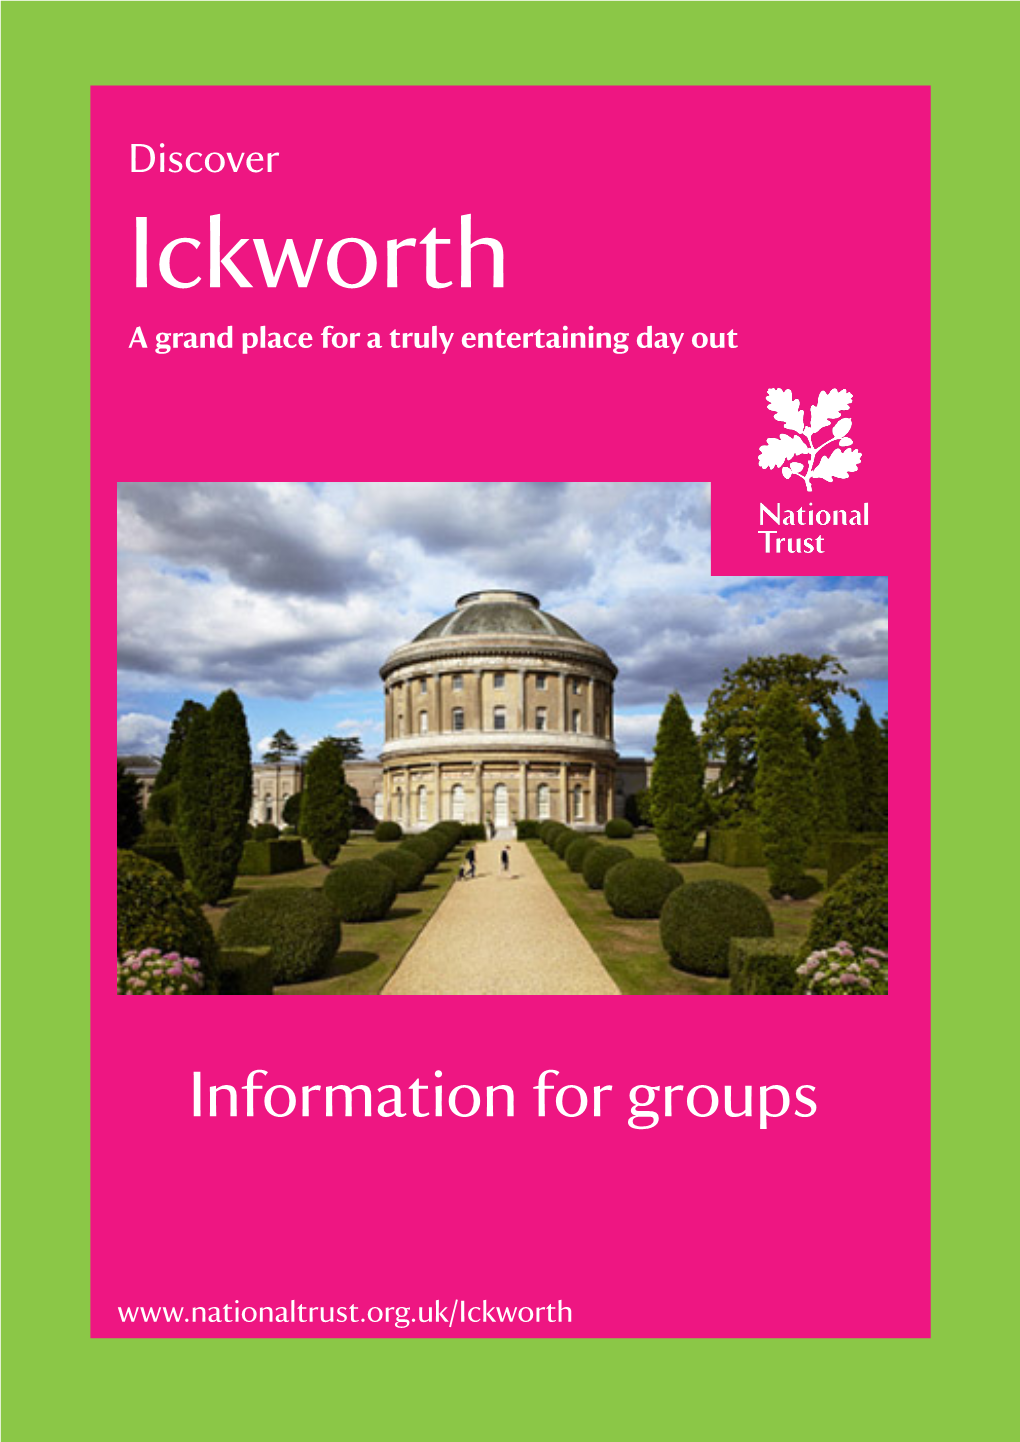 Ickworth a Grand Place for a Truly Entertaining Day Out